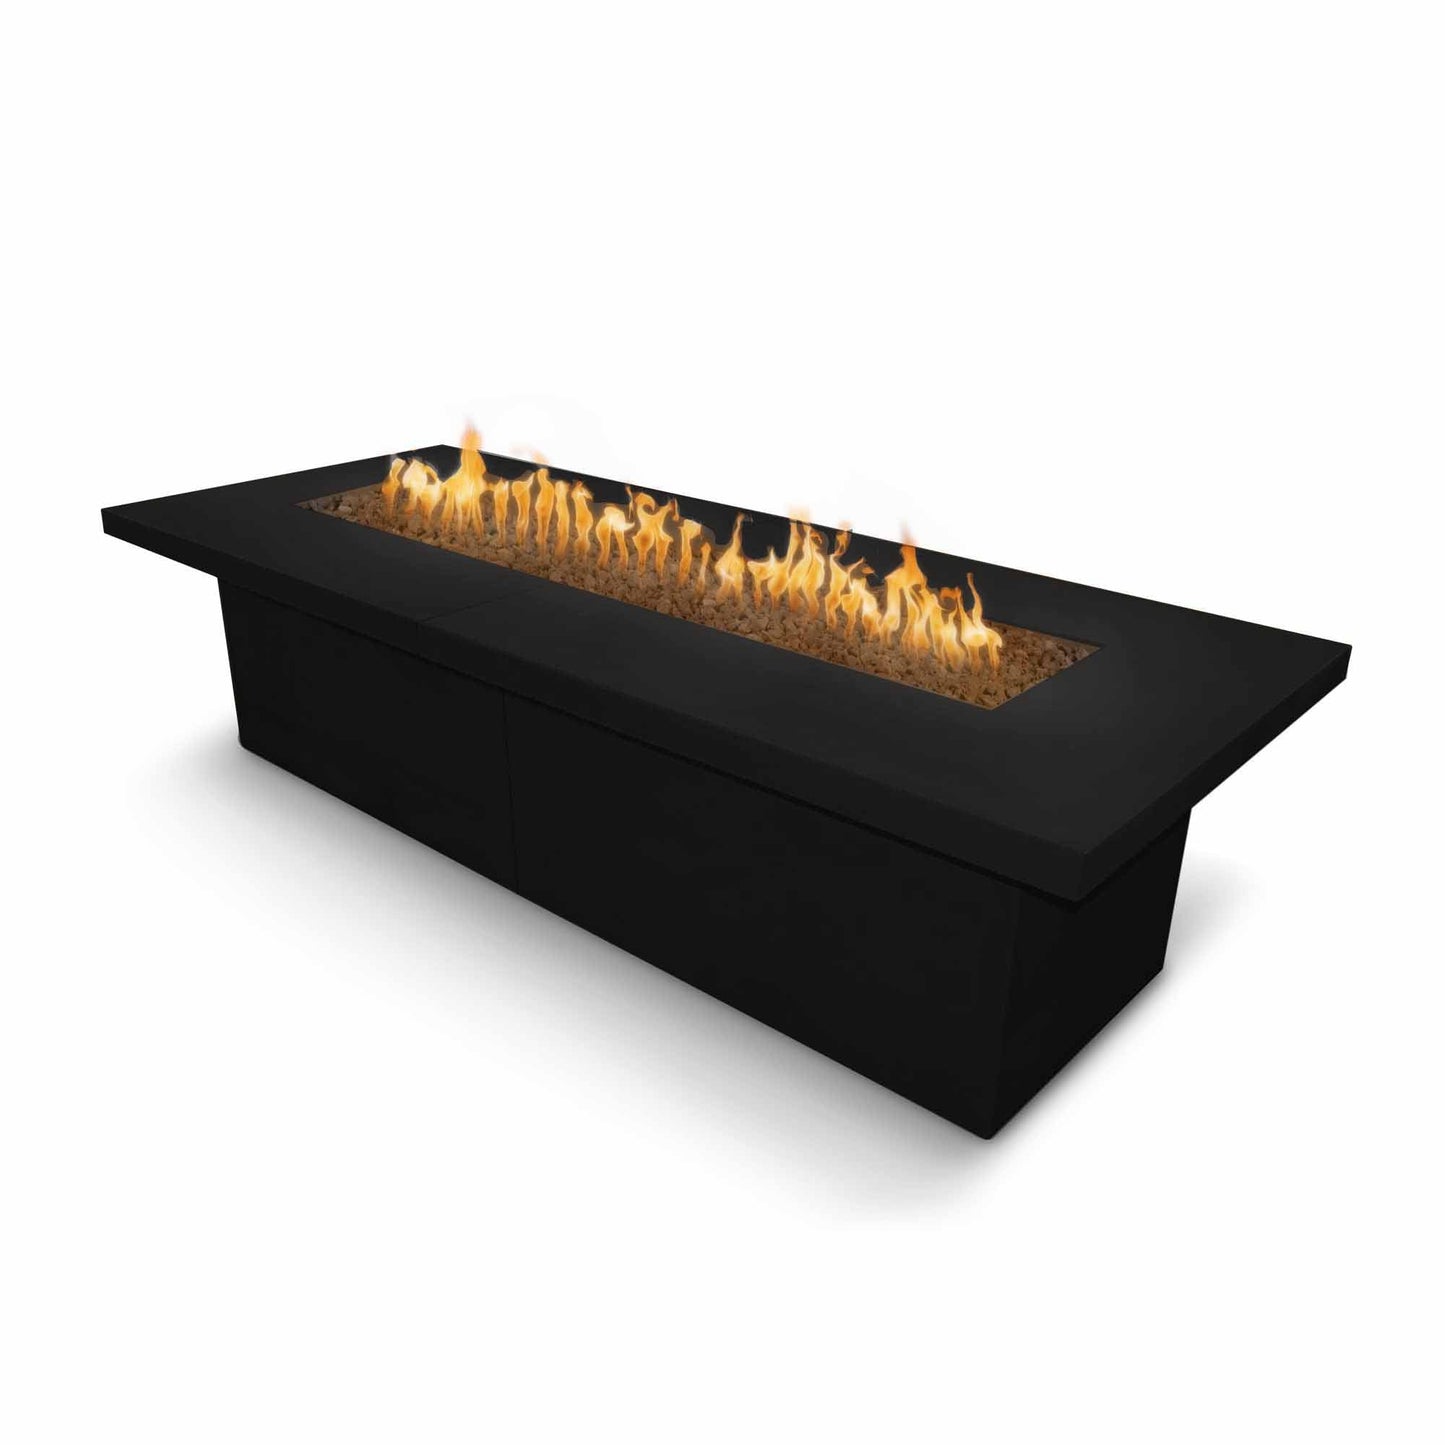 The Outdoor Plus Rectangular Newport 72" Corten Steel Natural Gas Fire Pit with 12V Electronic Ignition